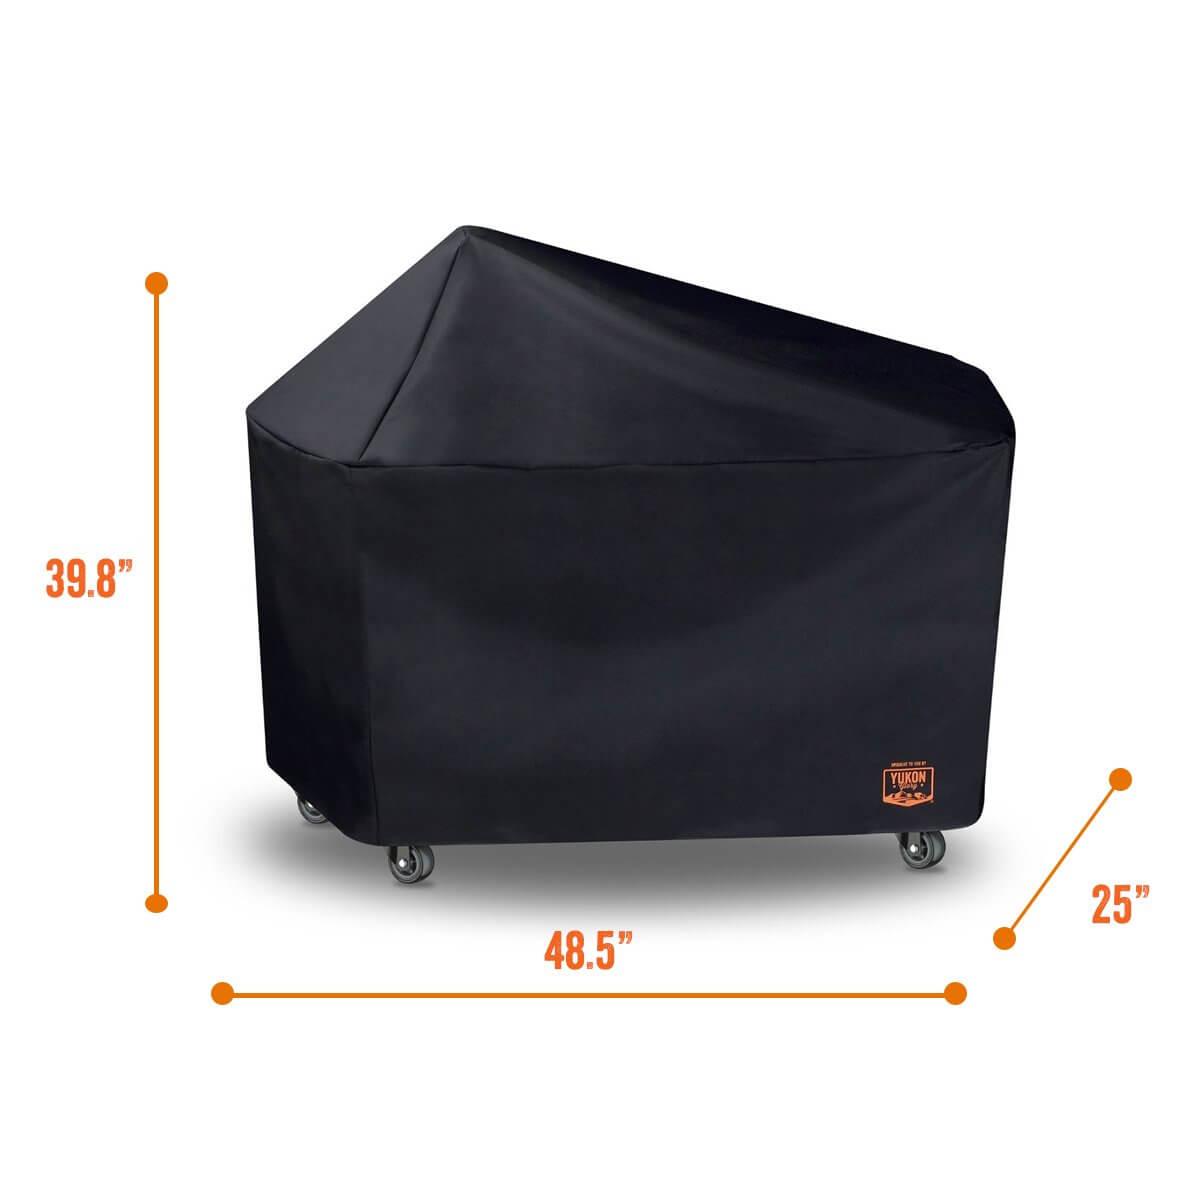 Premium Grill Cover for 22" Weber Performer Charcoal Grills Home & Garden from yukonglory